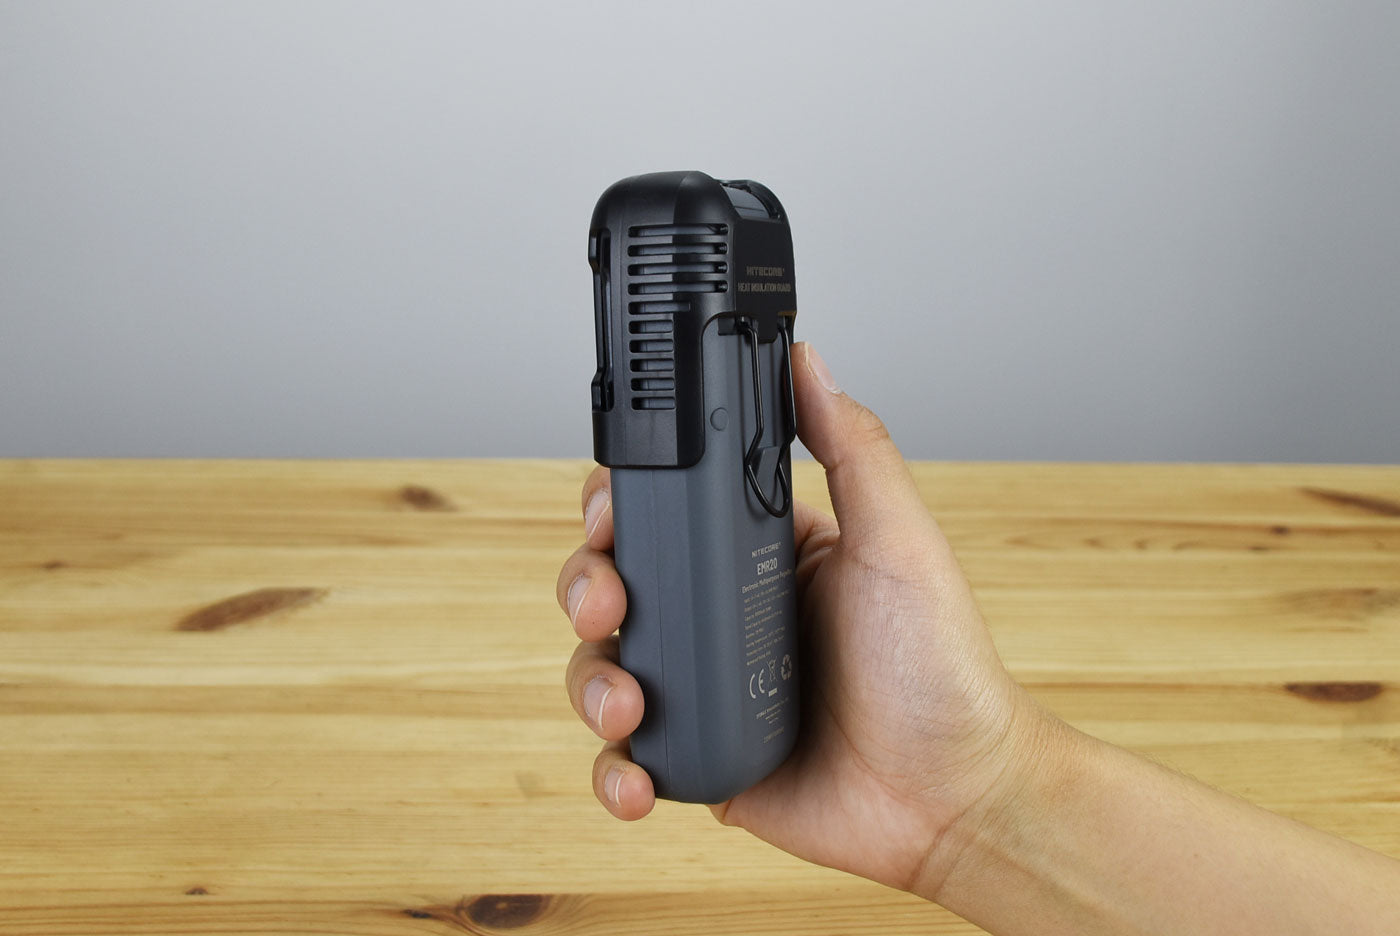 Nitecore EMR20 Rechargeable Mosquito Repeller PD & 10,000mAh Power Bank